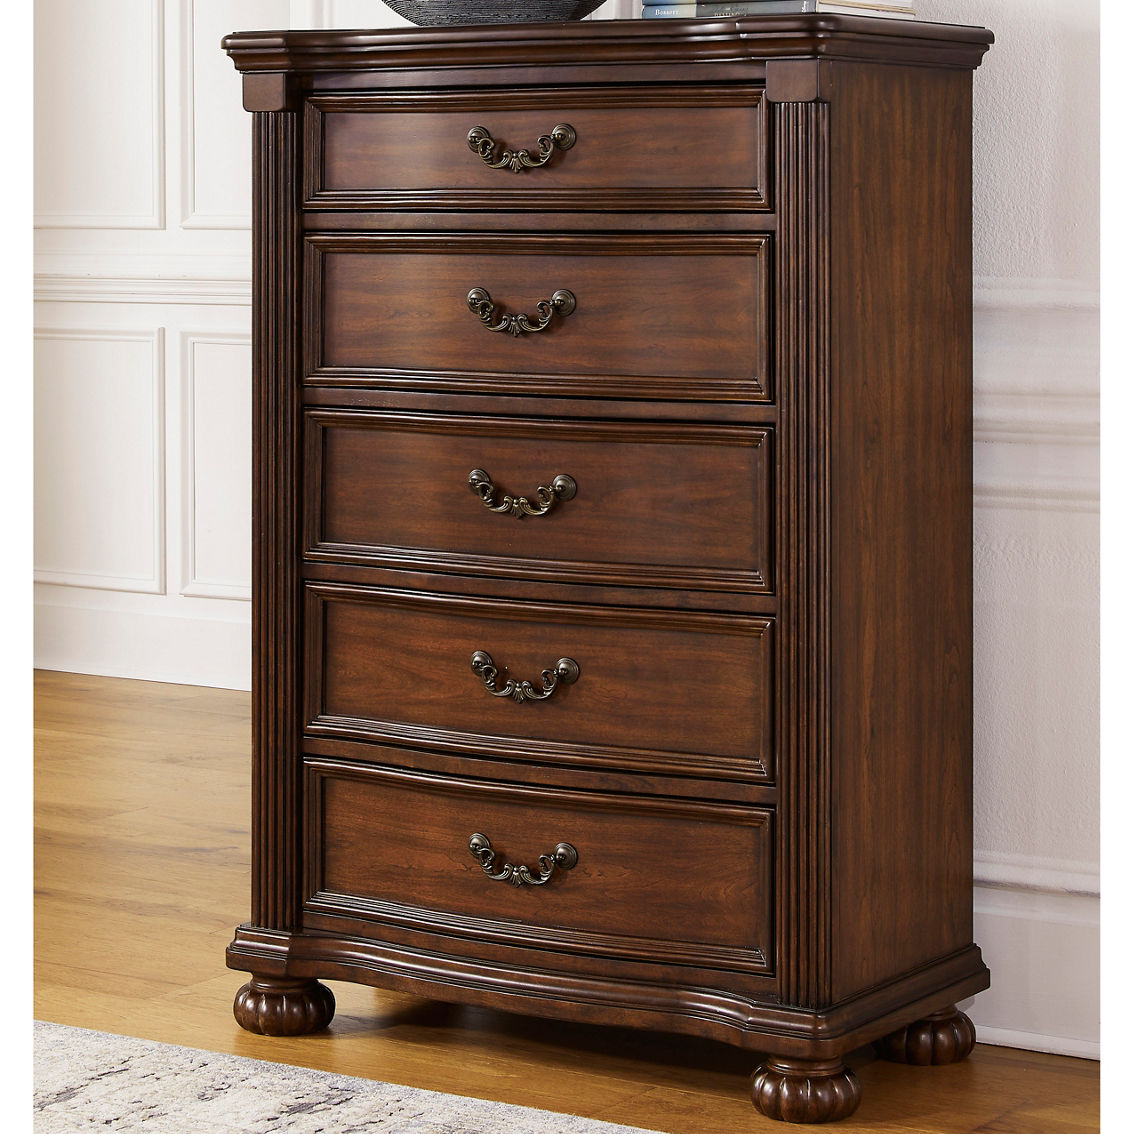 Signature Design By Ashley Lavinton Chest Of Drawers | Dressers ...